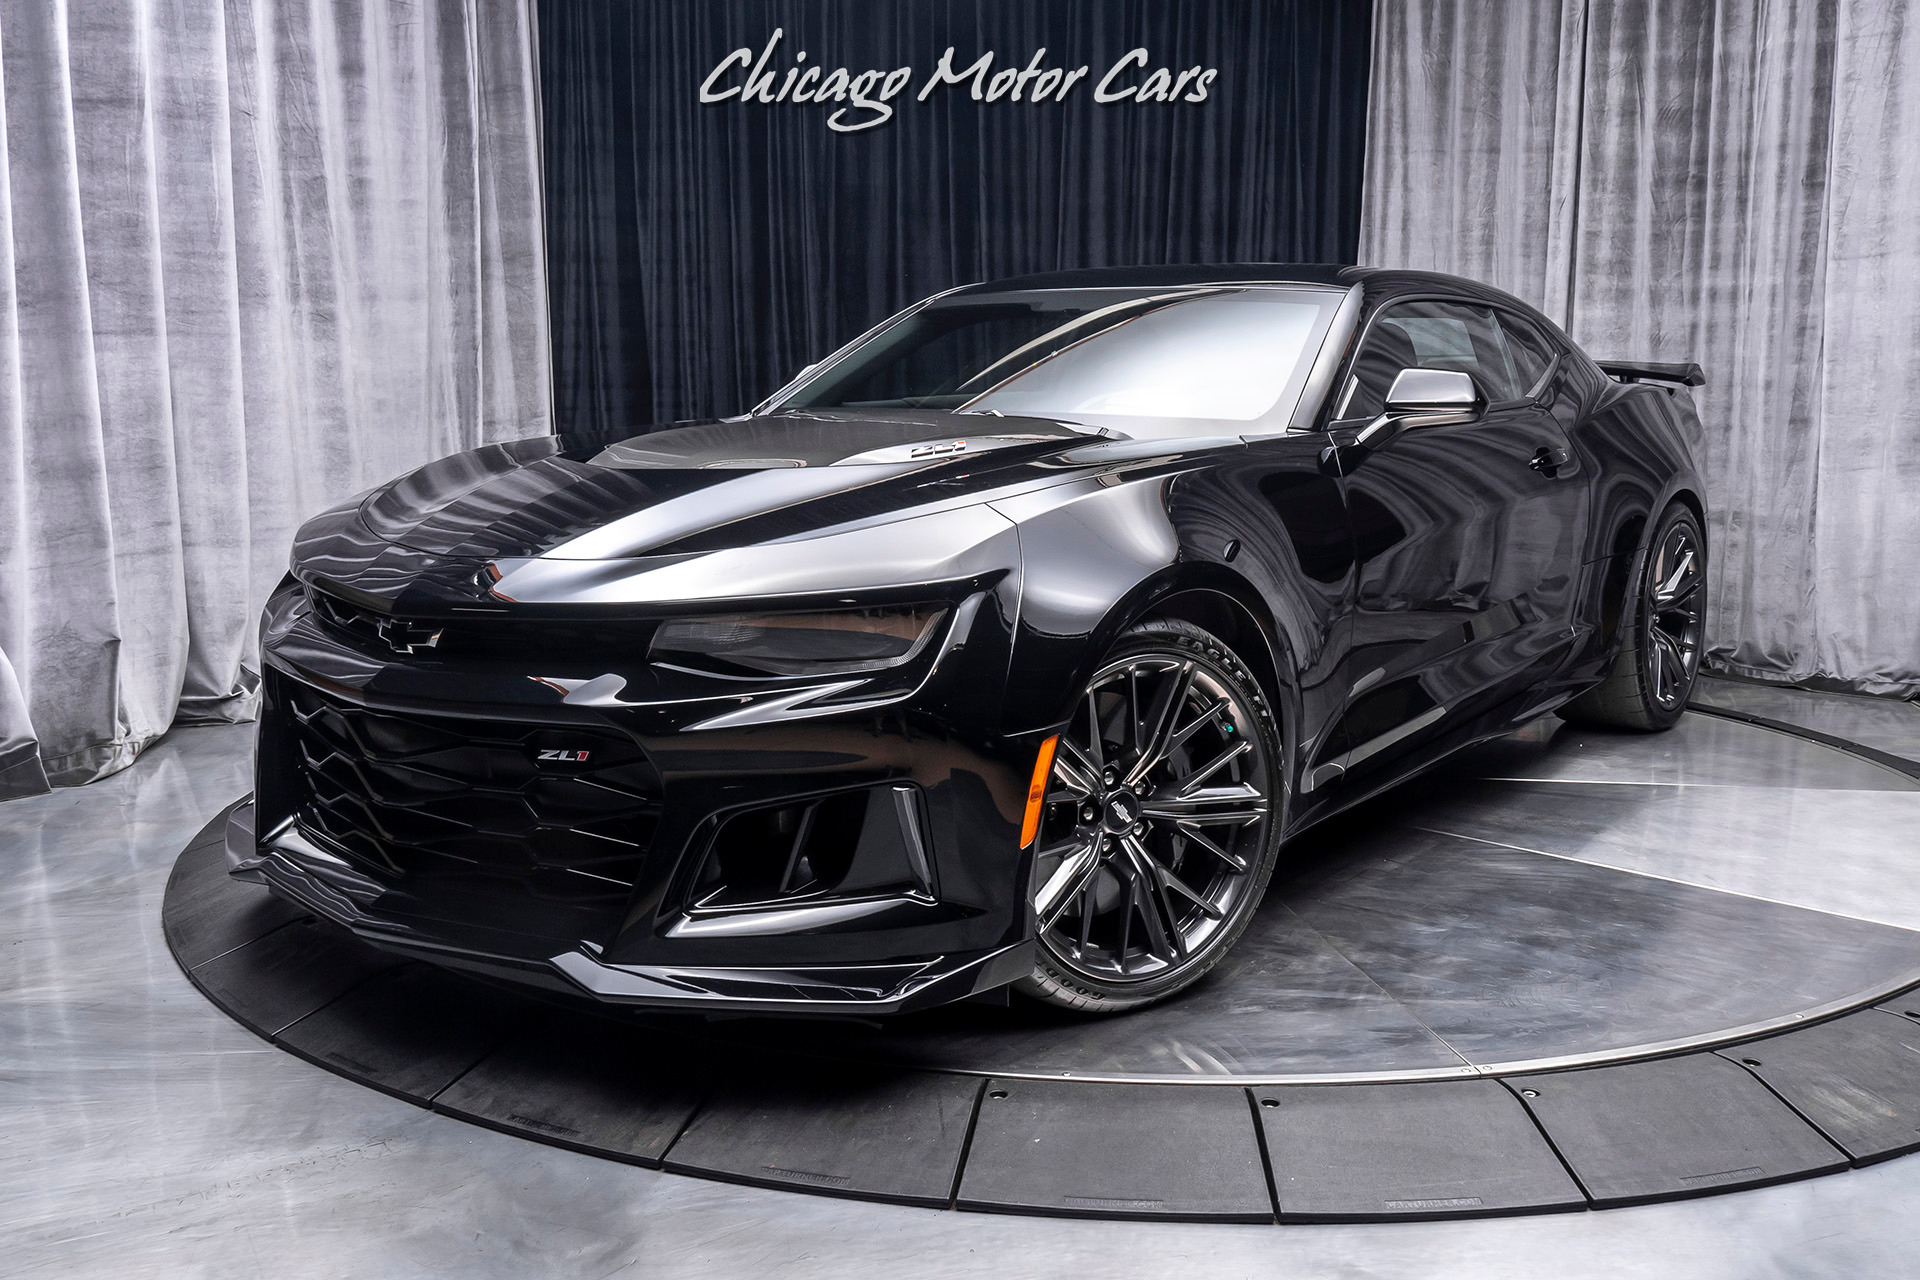 Used 2017 Chevrolet Camaro ZL1 Coupe ONLY 3,900 MILES! CARBON FIBER HOOD  INSERT! 6-Speed Manual! For Sale (Special Pricing) | Chicago Motor Cars  Stock #16072